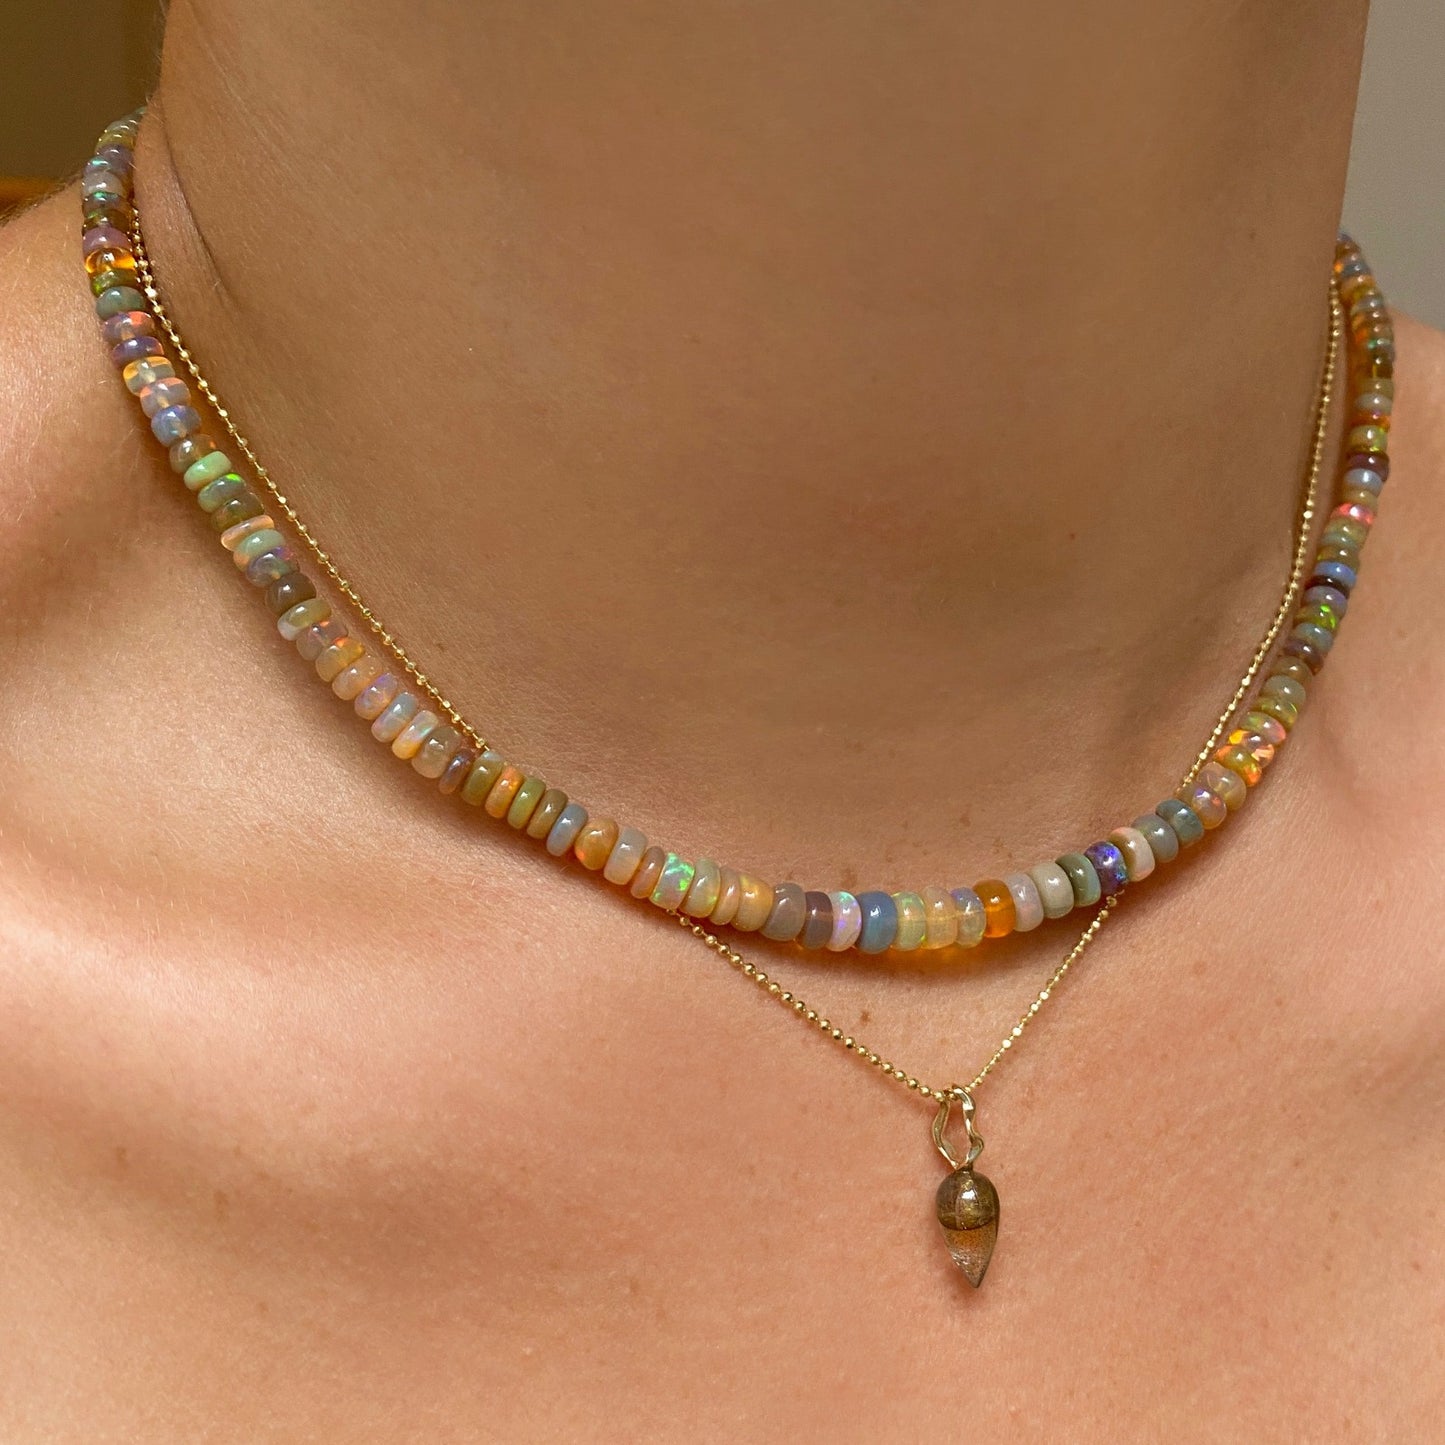 Shimmering beaded necklace made of smooth opal rondels in shades of light yellow, light orange, white, and brown on a slim gold lobster clasp. Styled on a neck layered with the bead chain necklace and acorn drop charm.